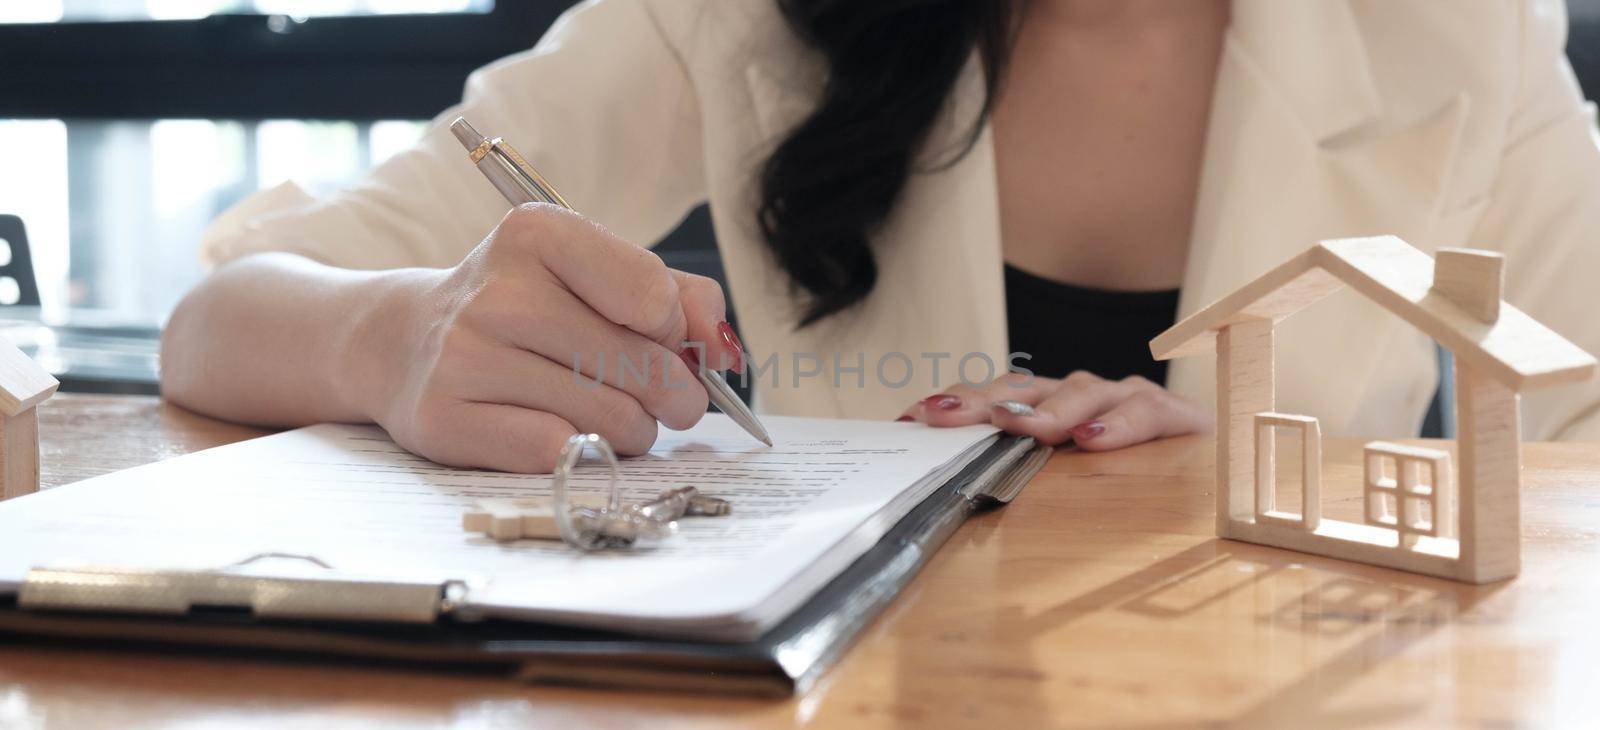 real estate agent assisting client to sign contract paper at desk with house model.